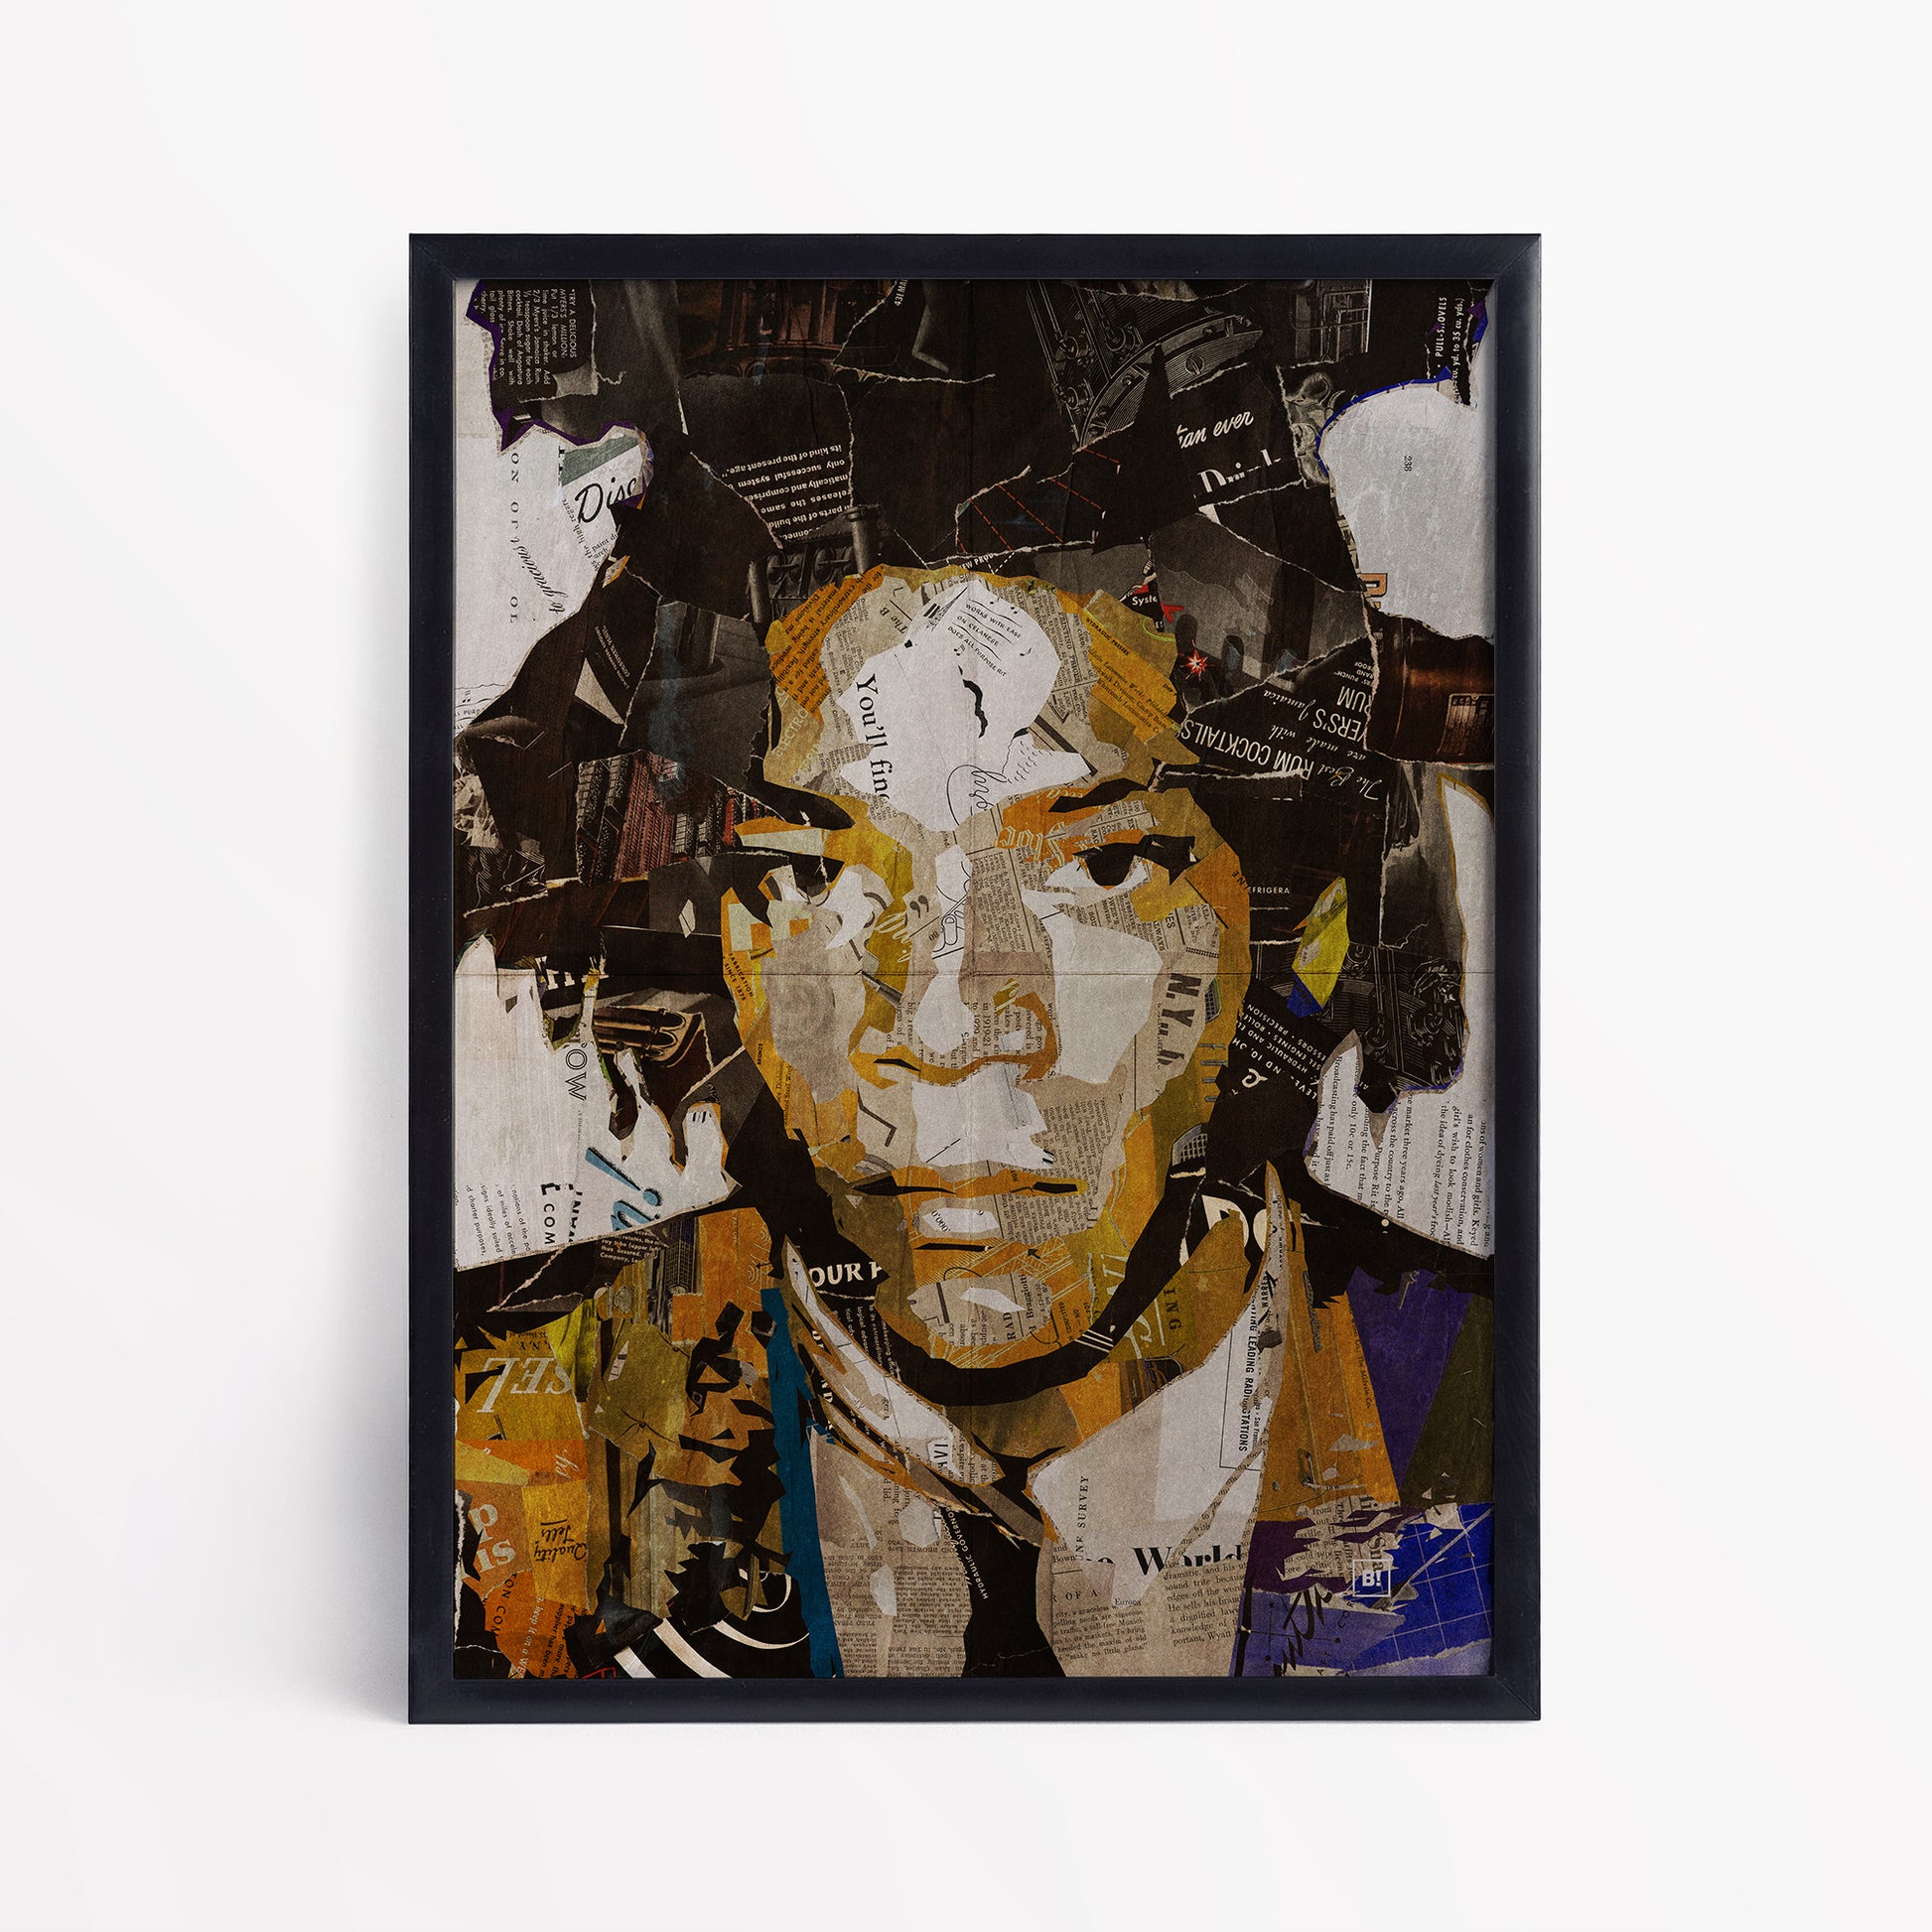 Be inspired by our iconic collage portrait art print of Jean-Michel Basquiat. This artwork has been printed using the giclée process on archival acid-free paper and is presented in a sleek black frame, showcasing its timeless beauty in every detail.